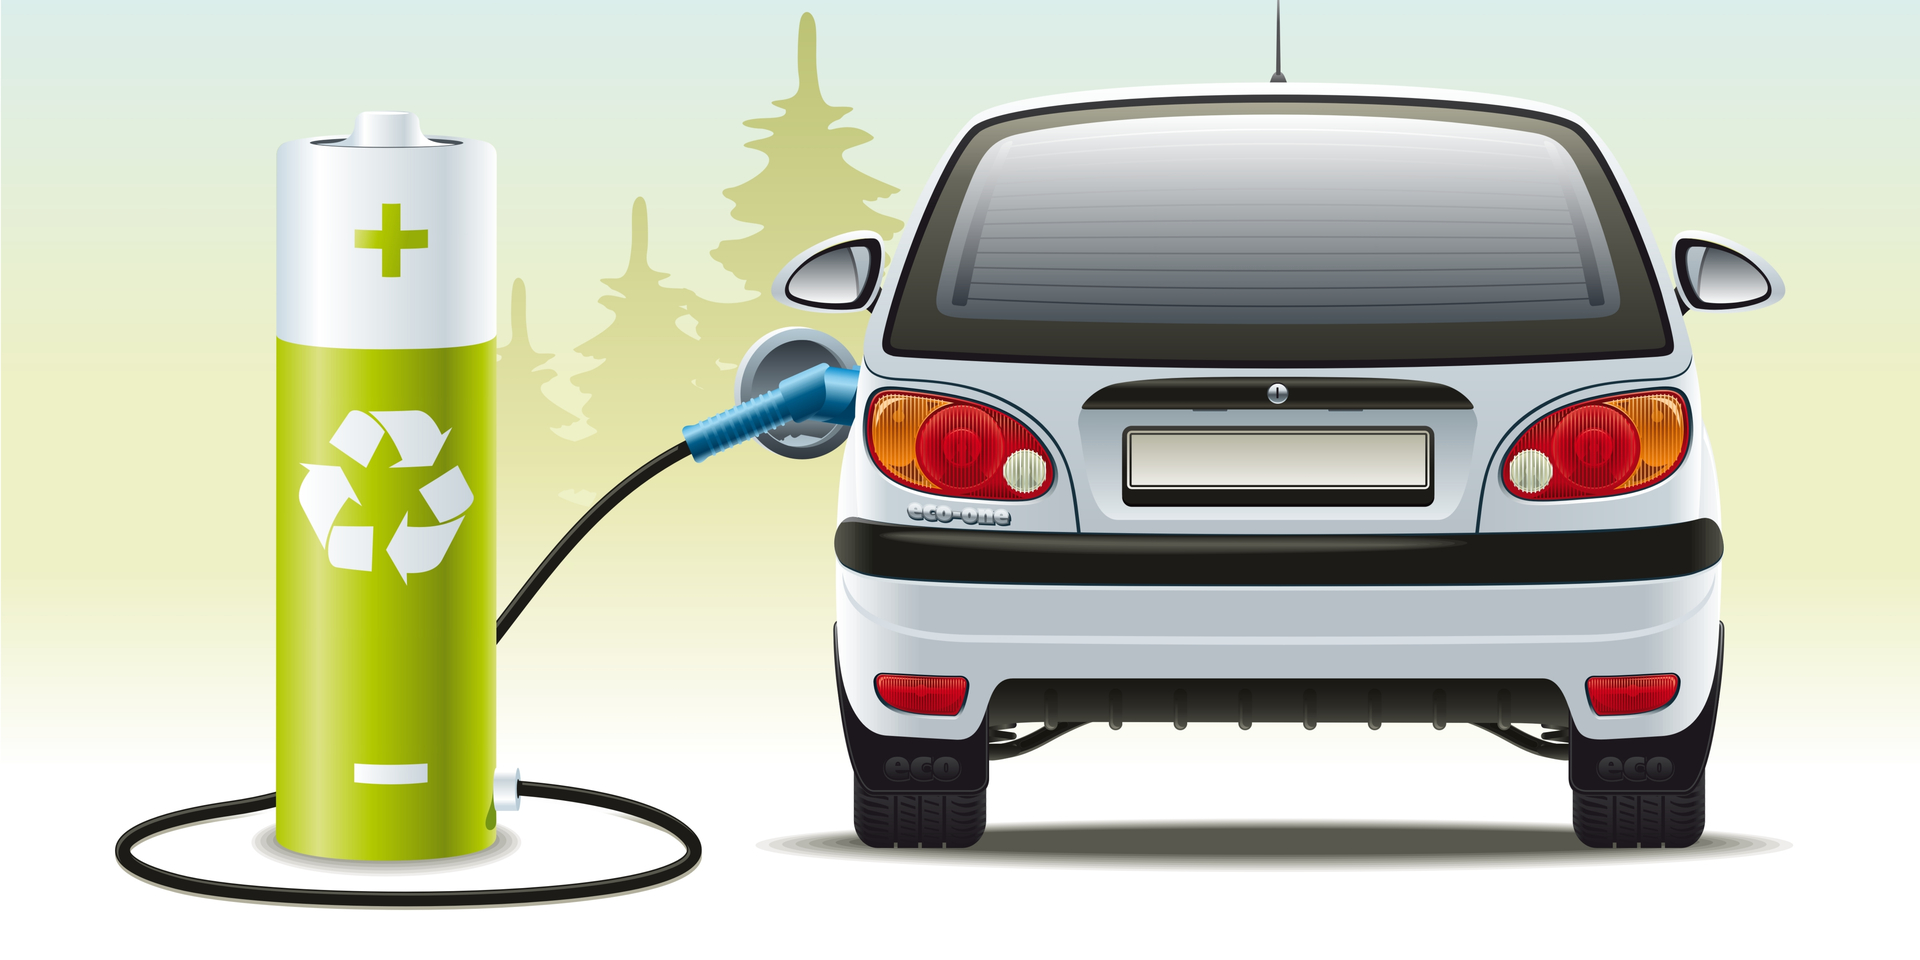 Apart from being ecofriendly, electric cars will reduce the cost of travel and reduce CO2 emissions